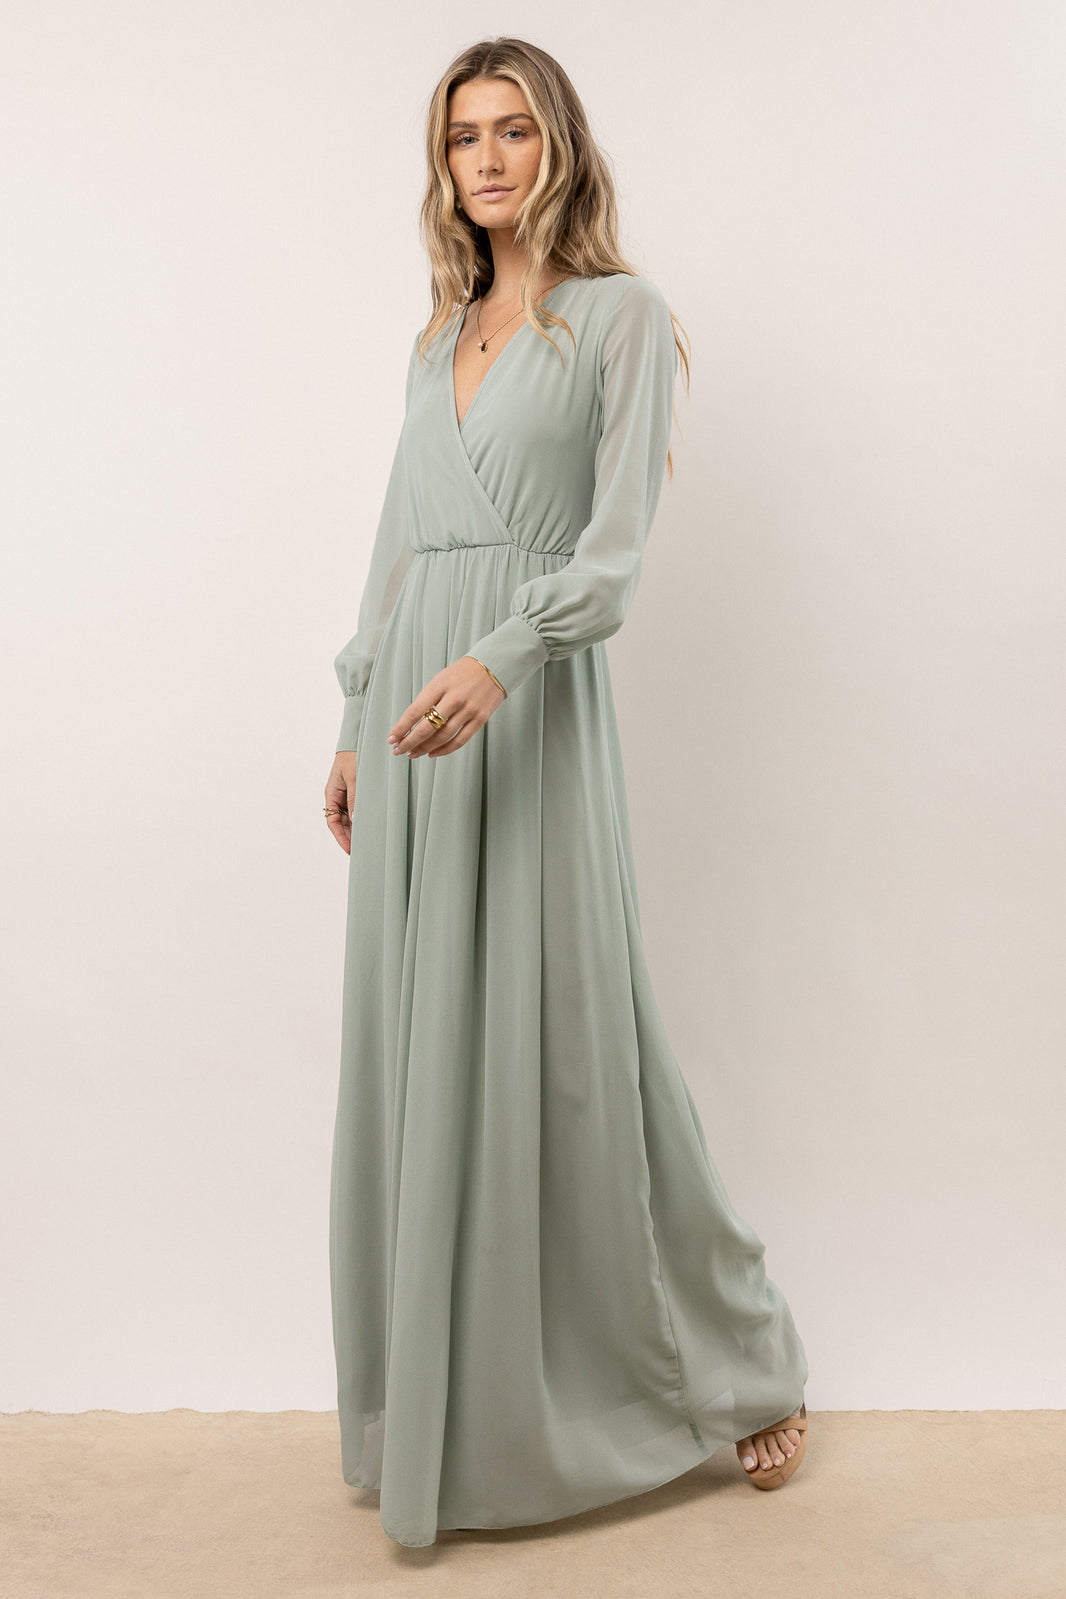 Bridesmaid Dresses: Shop Aesthetic Dresses for Every Wedding Party | böhme